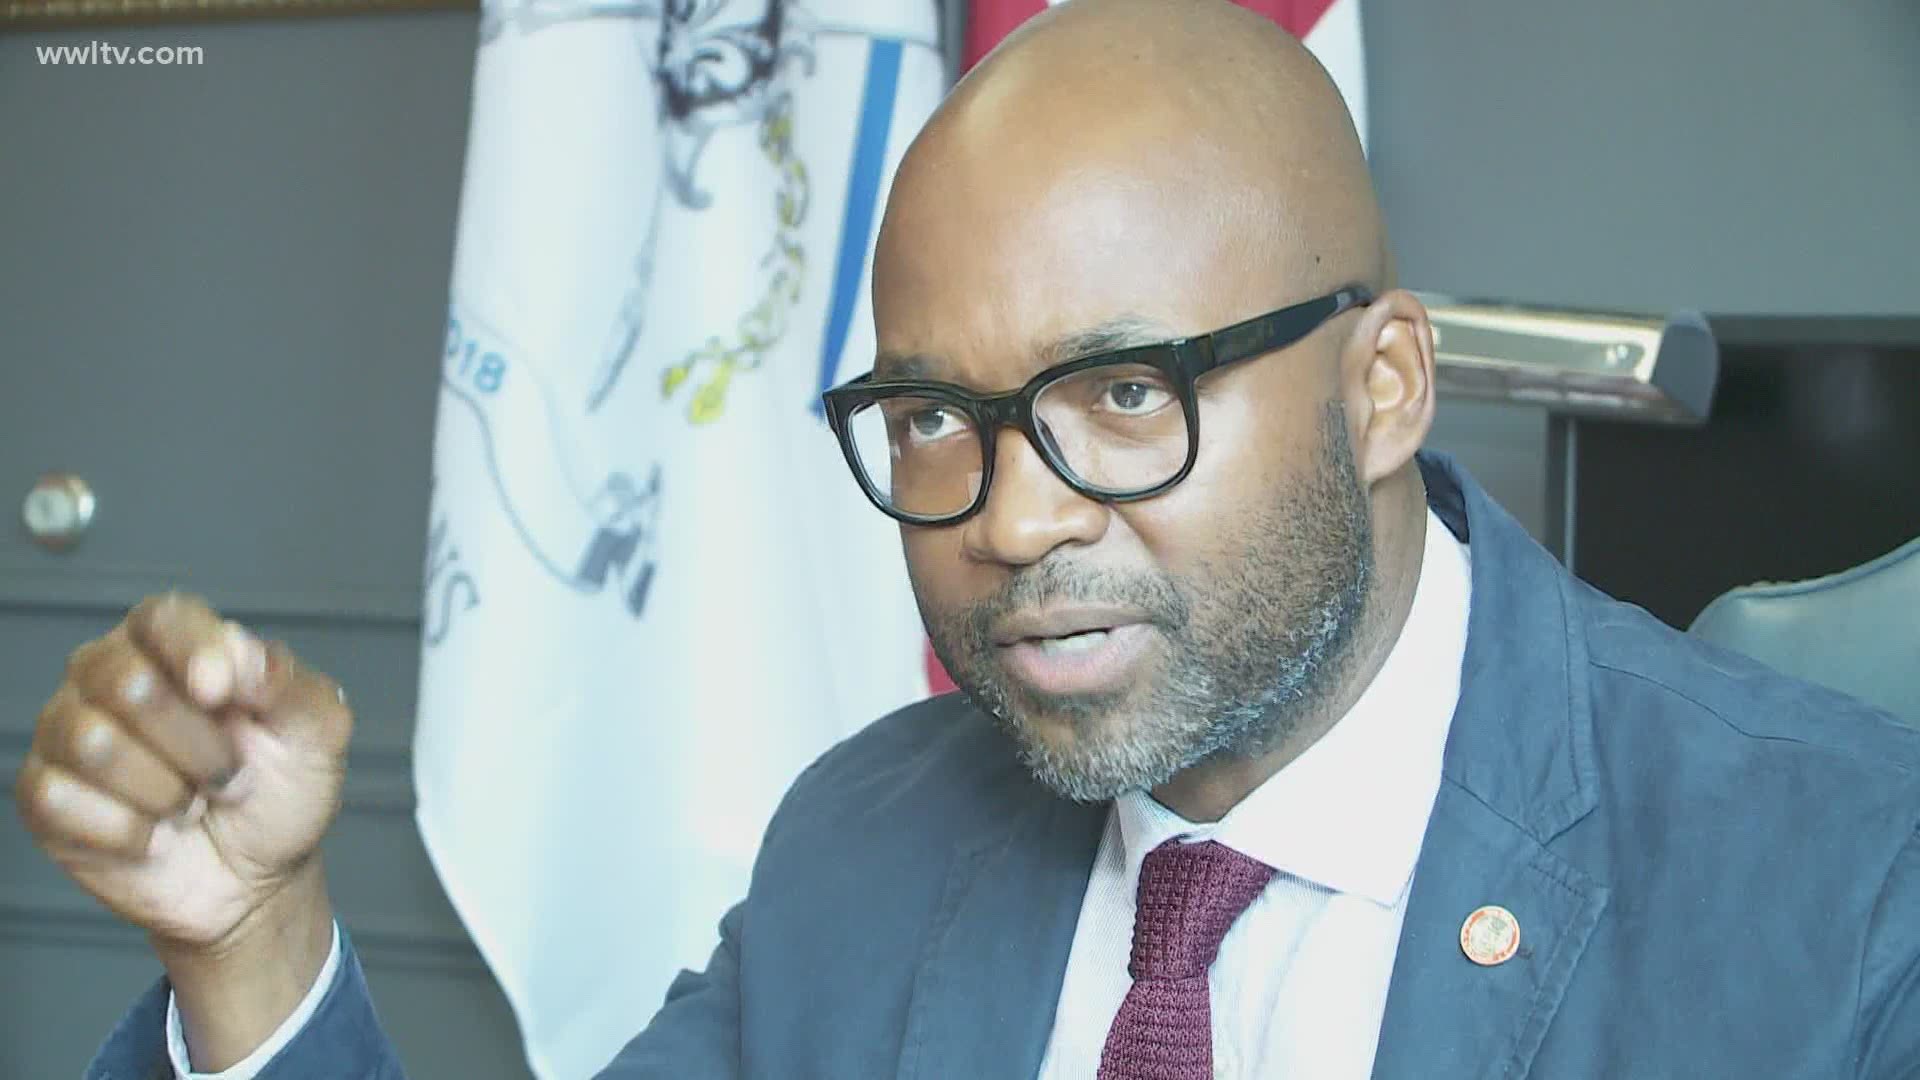 New Orleans Councilman and candidate for the city District Attorney seat addresses a recently discovered federal investigation into his tax filings.